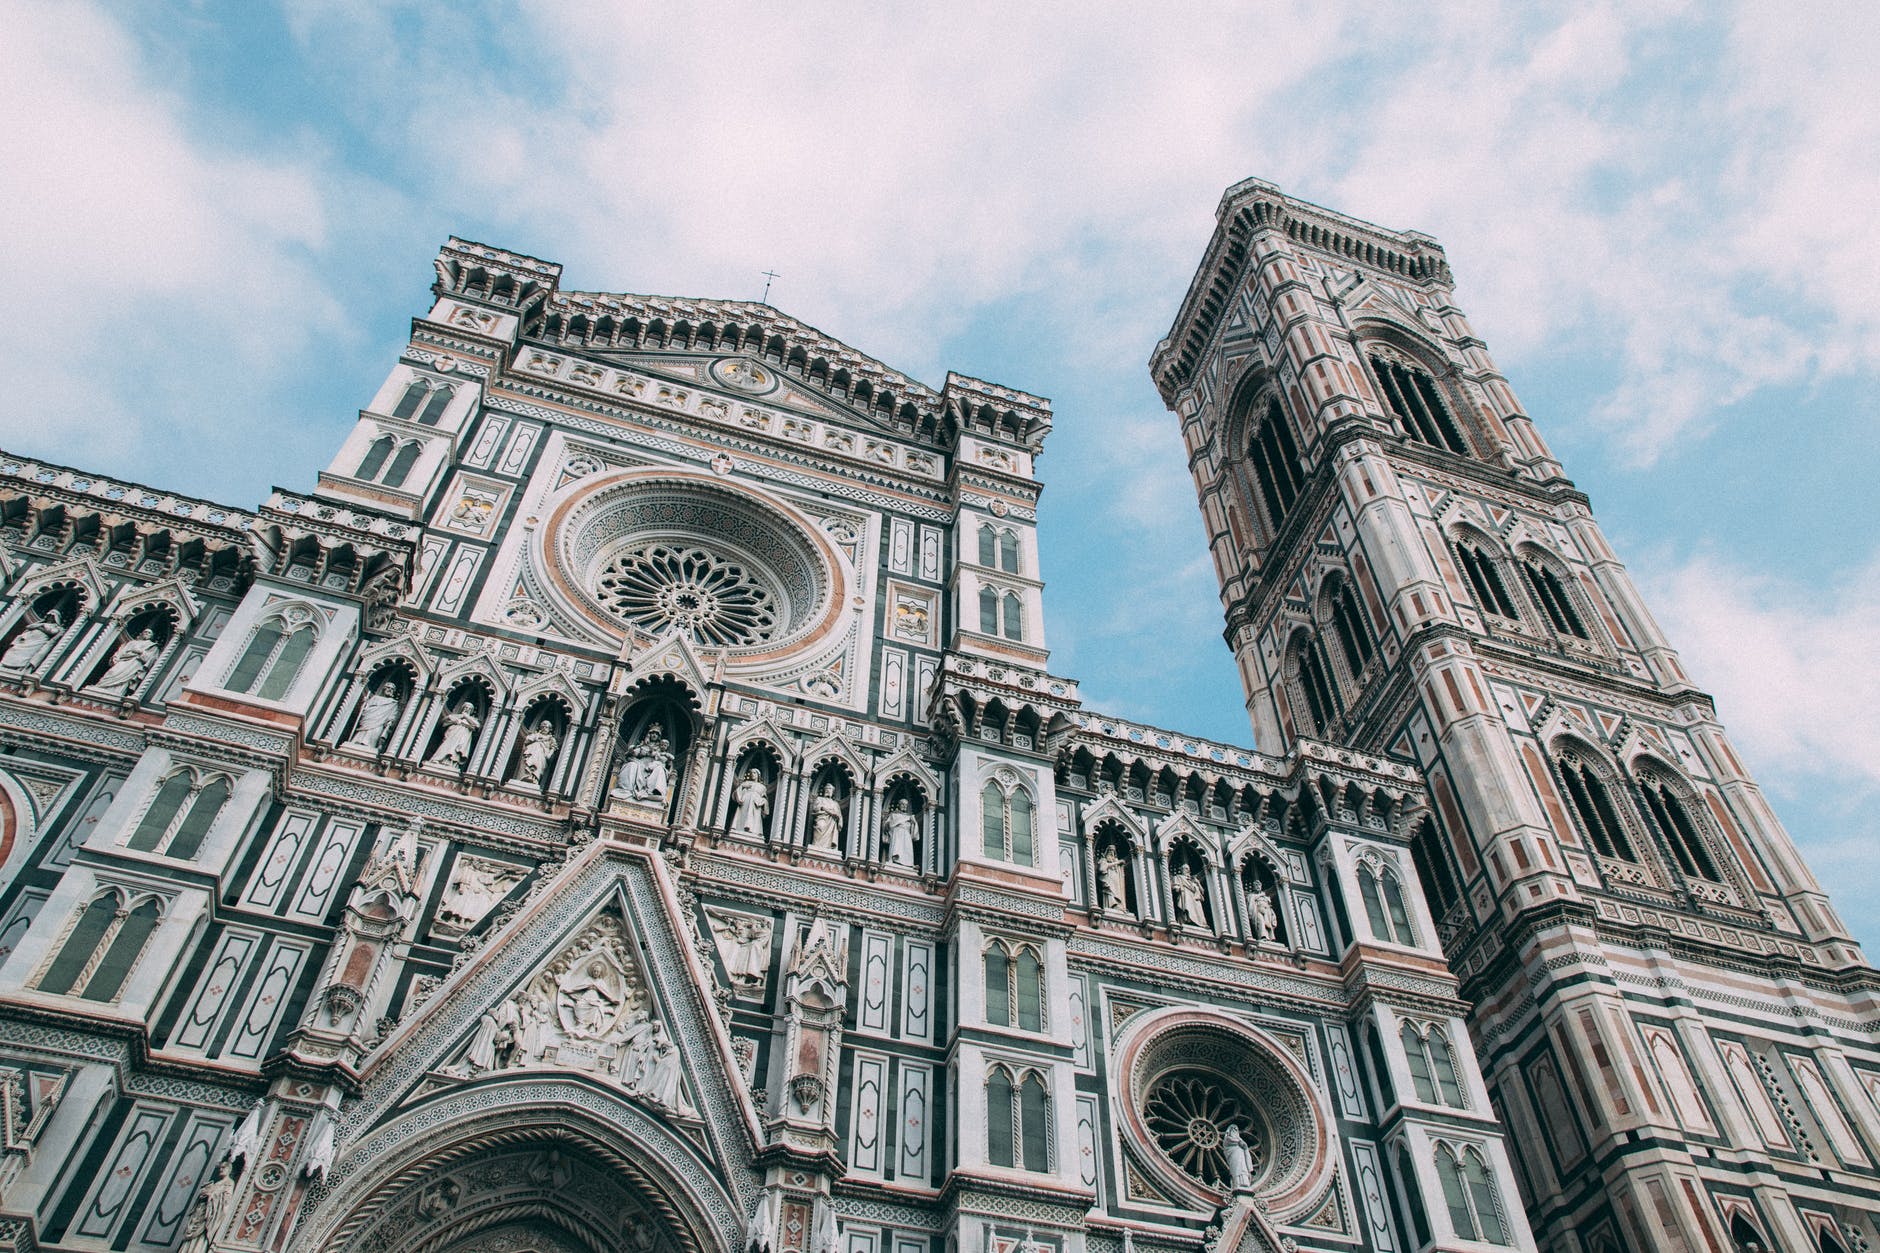 A photo of a tourist spot in Florence